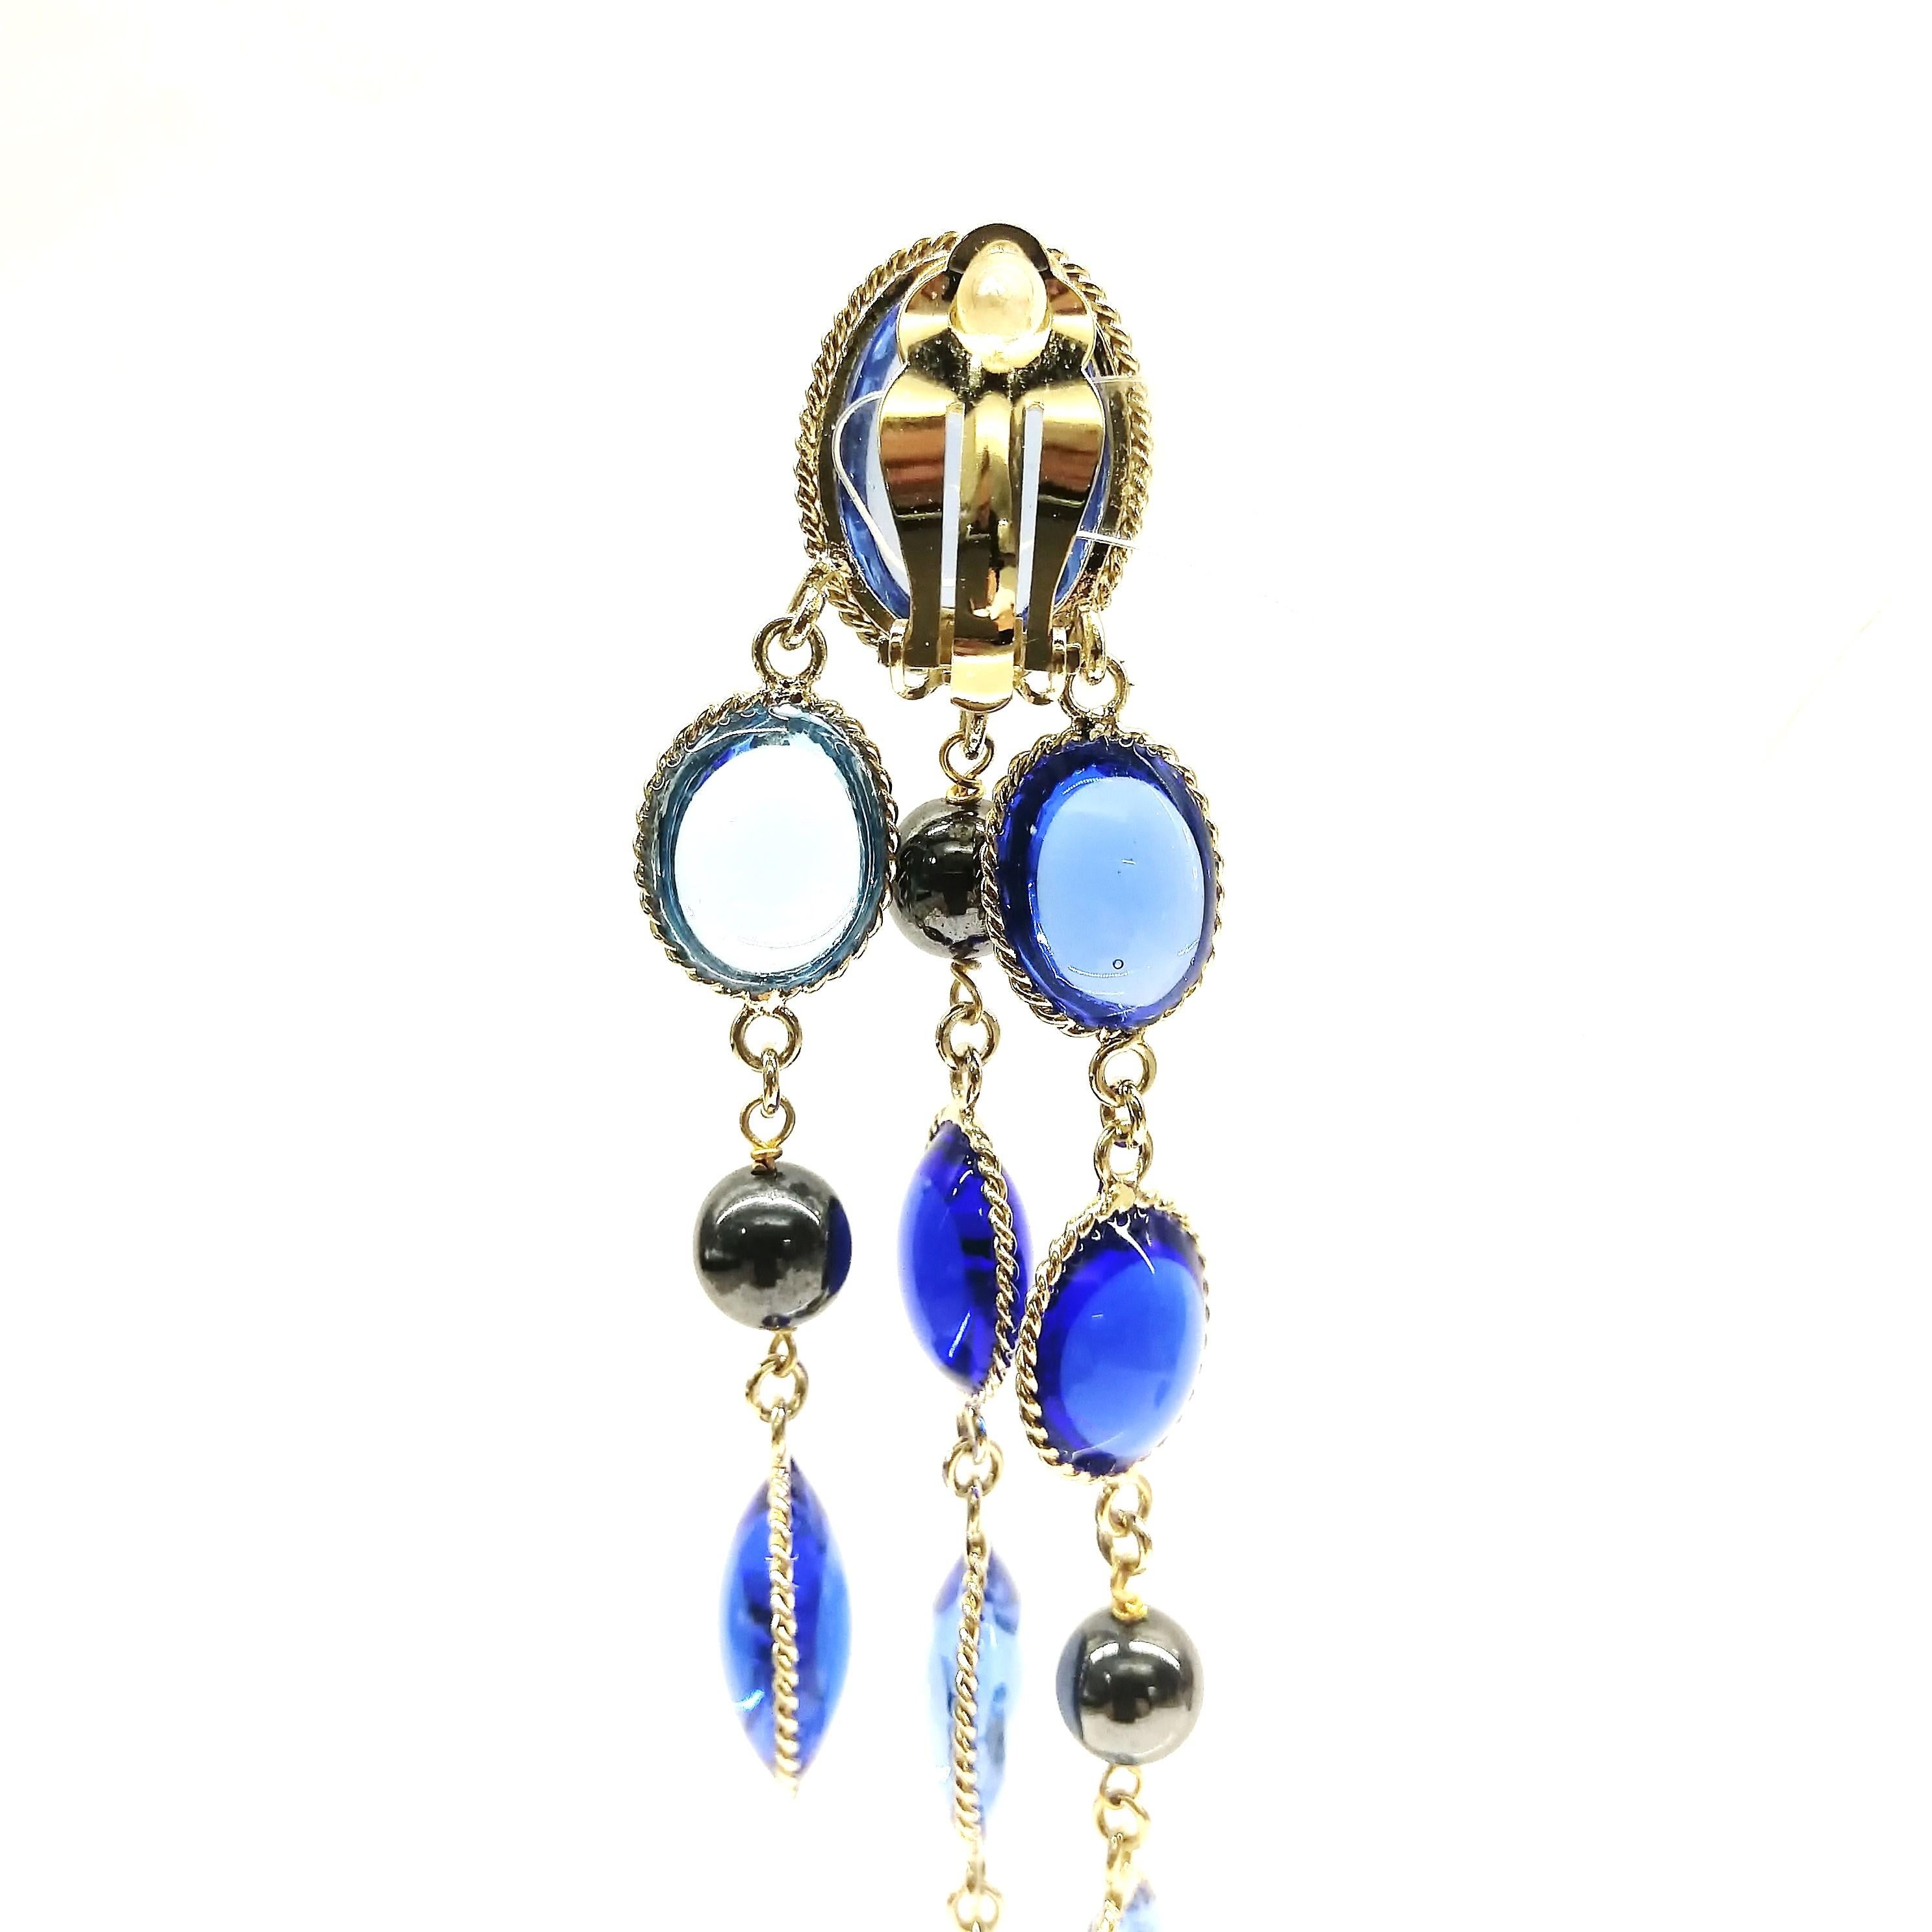 'WW; sapphire, light sapphire poured glass, and pearl 3 row drop earrings, 2018 For Sale 2